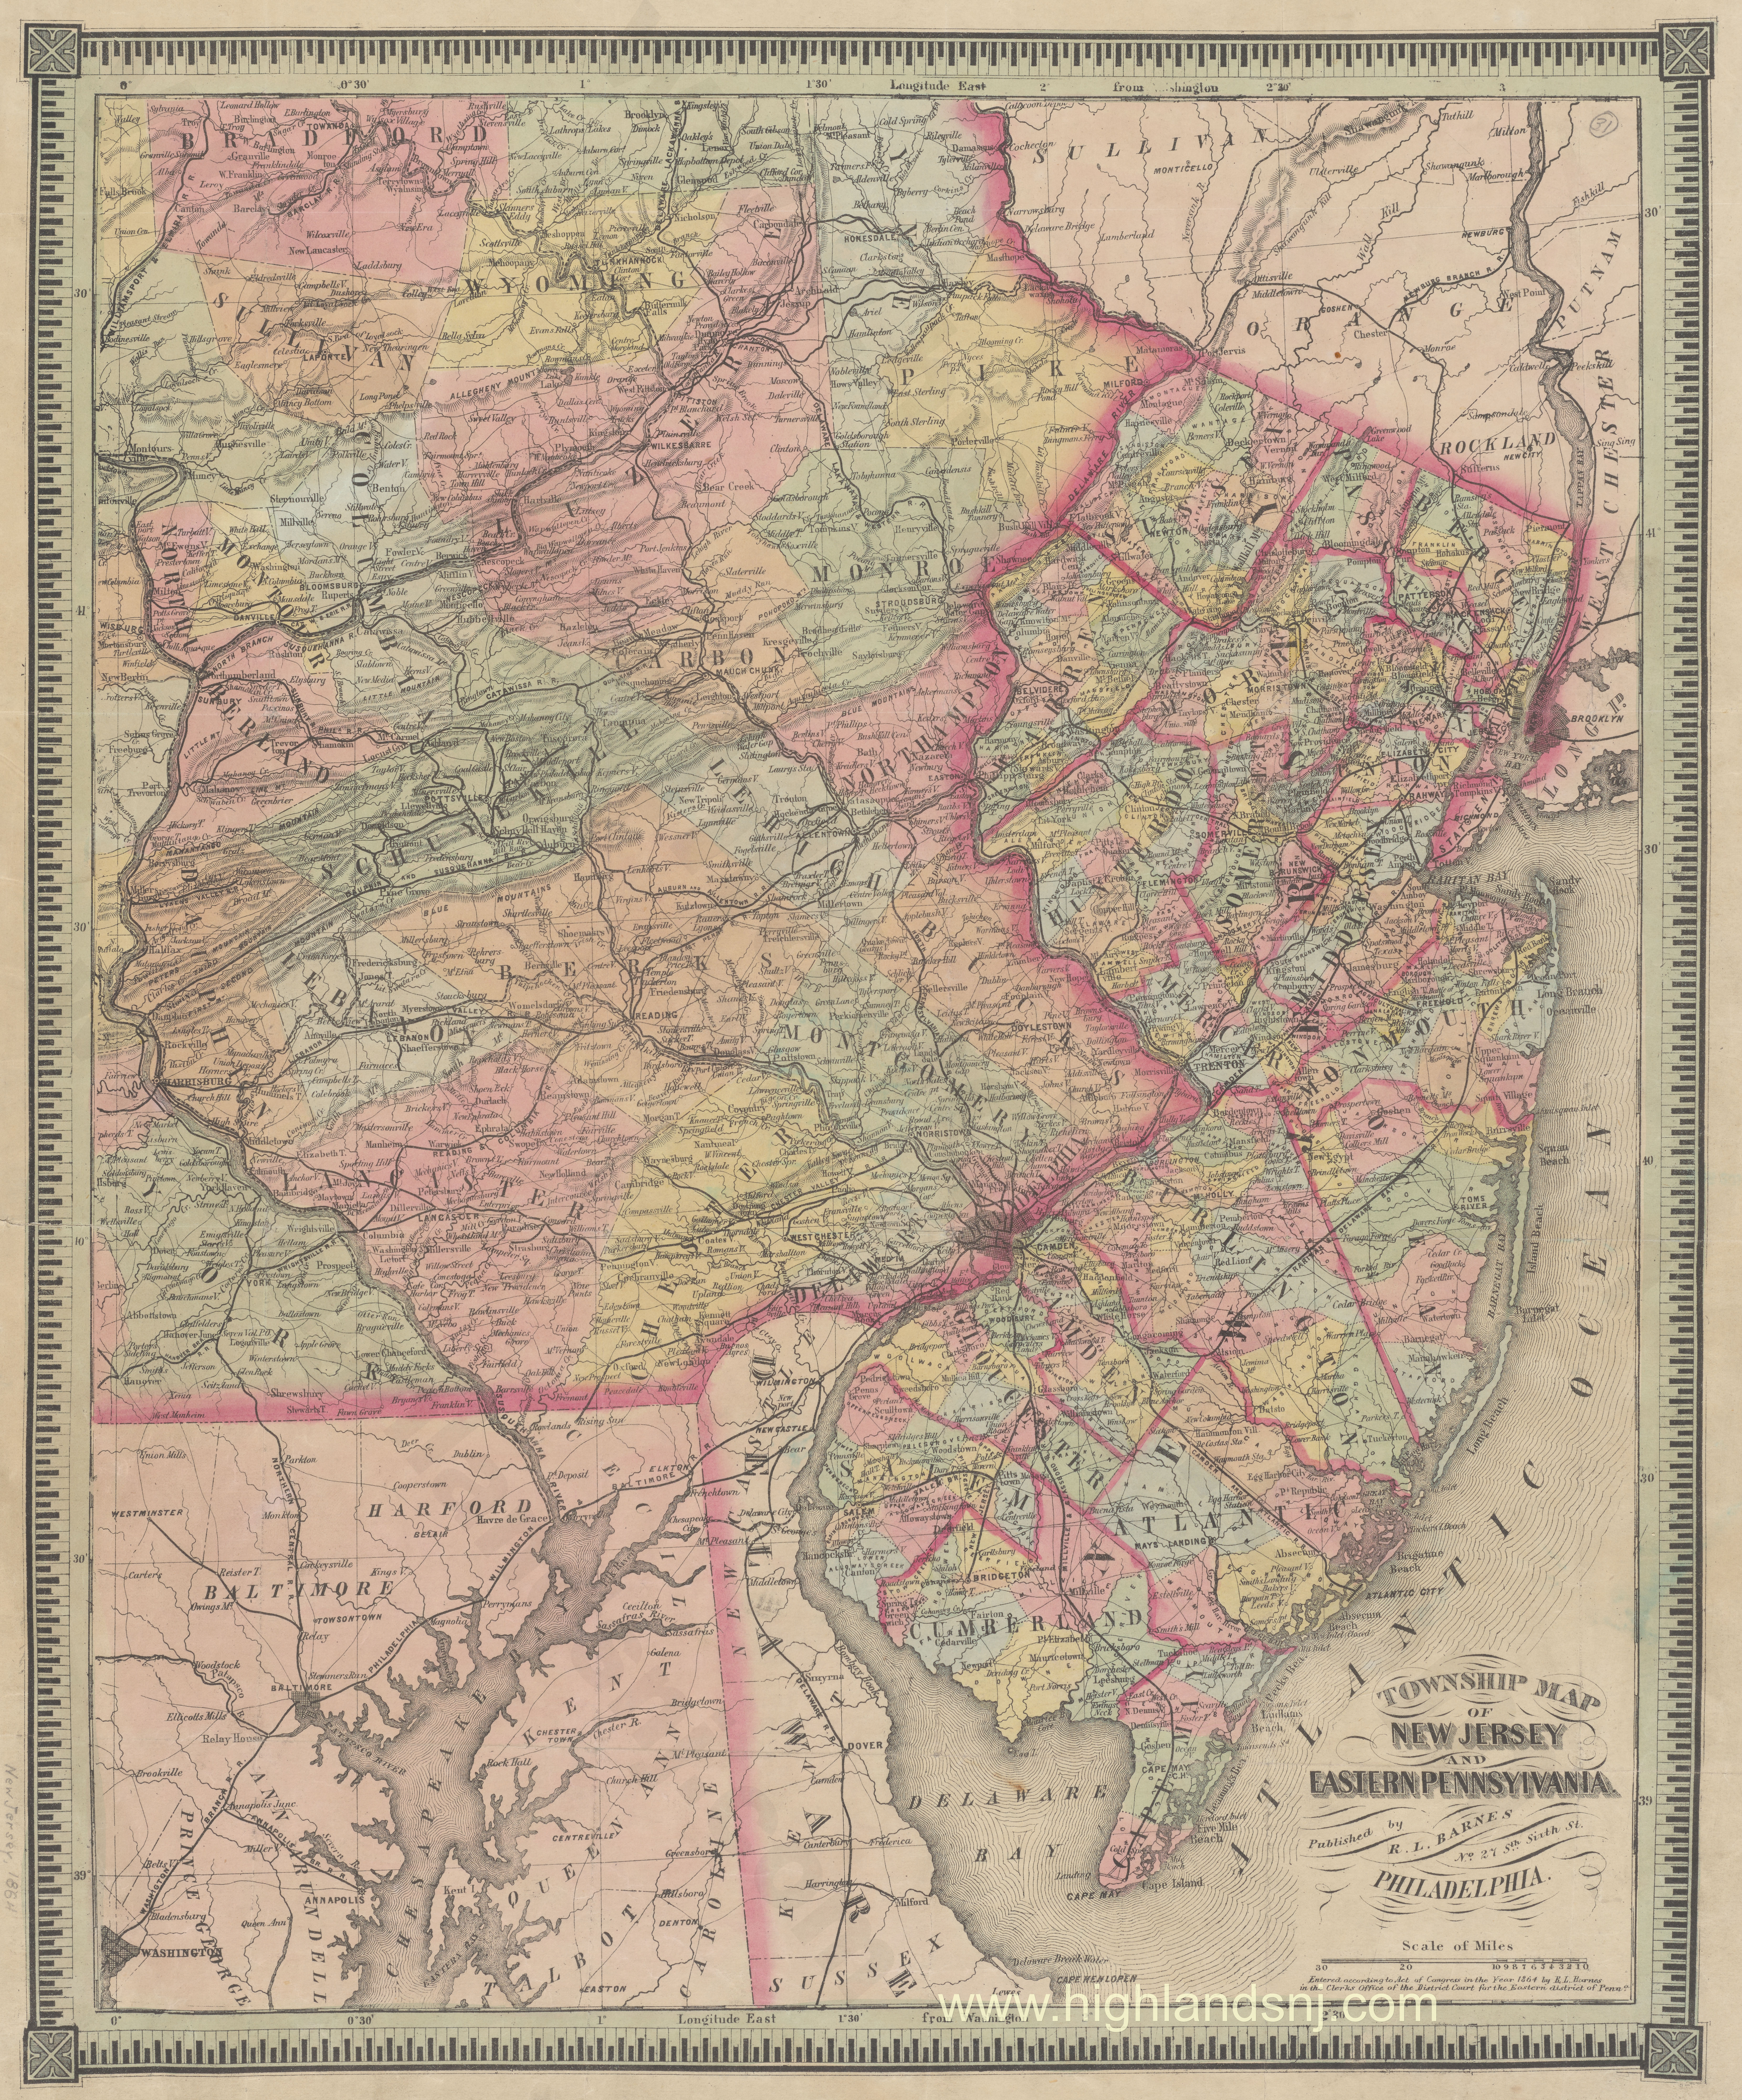 1864 Township map of New Jersey and Eastern Pennsylvania